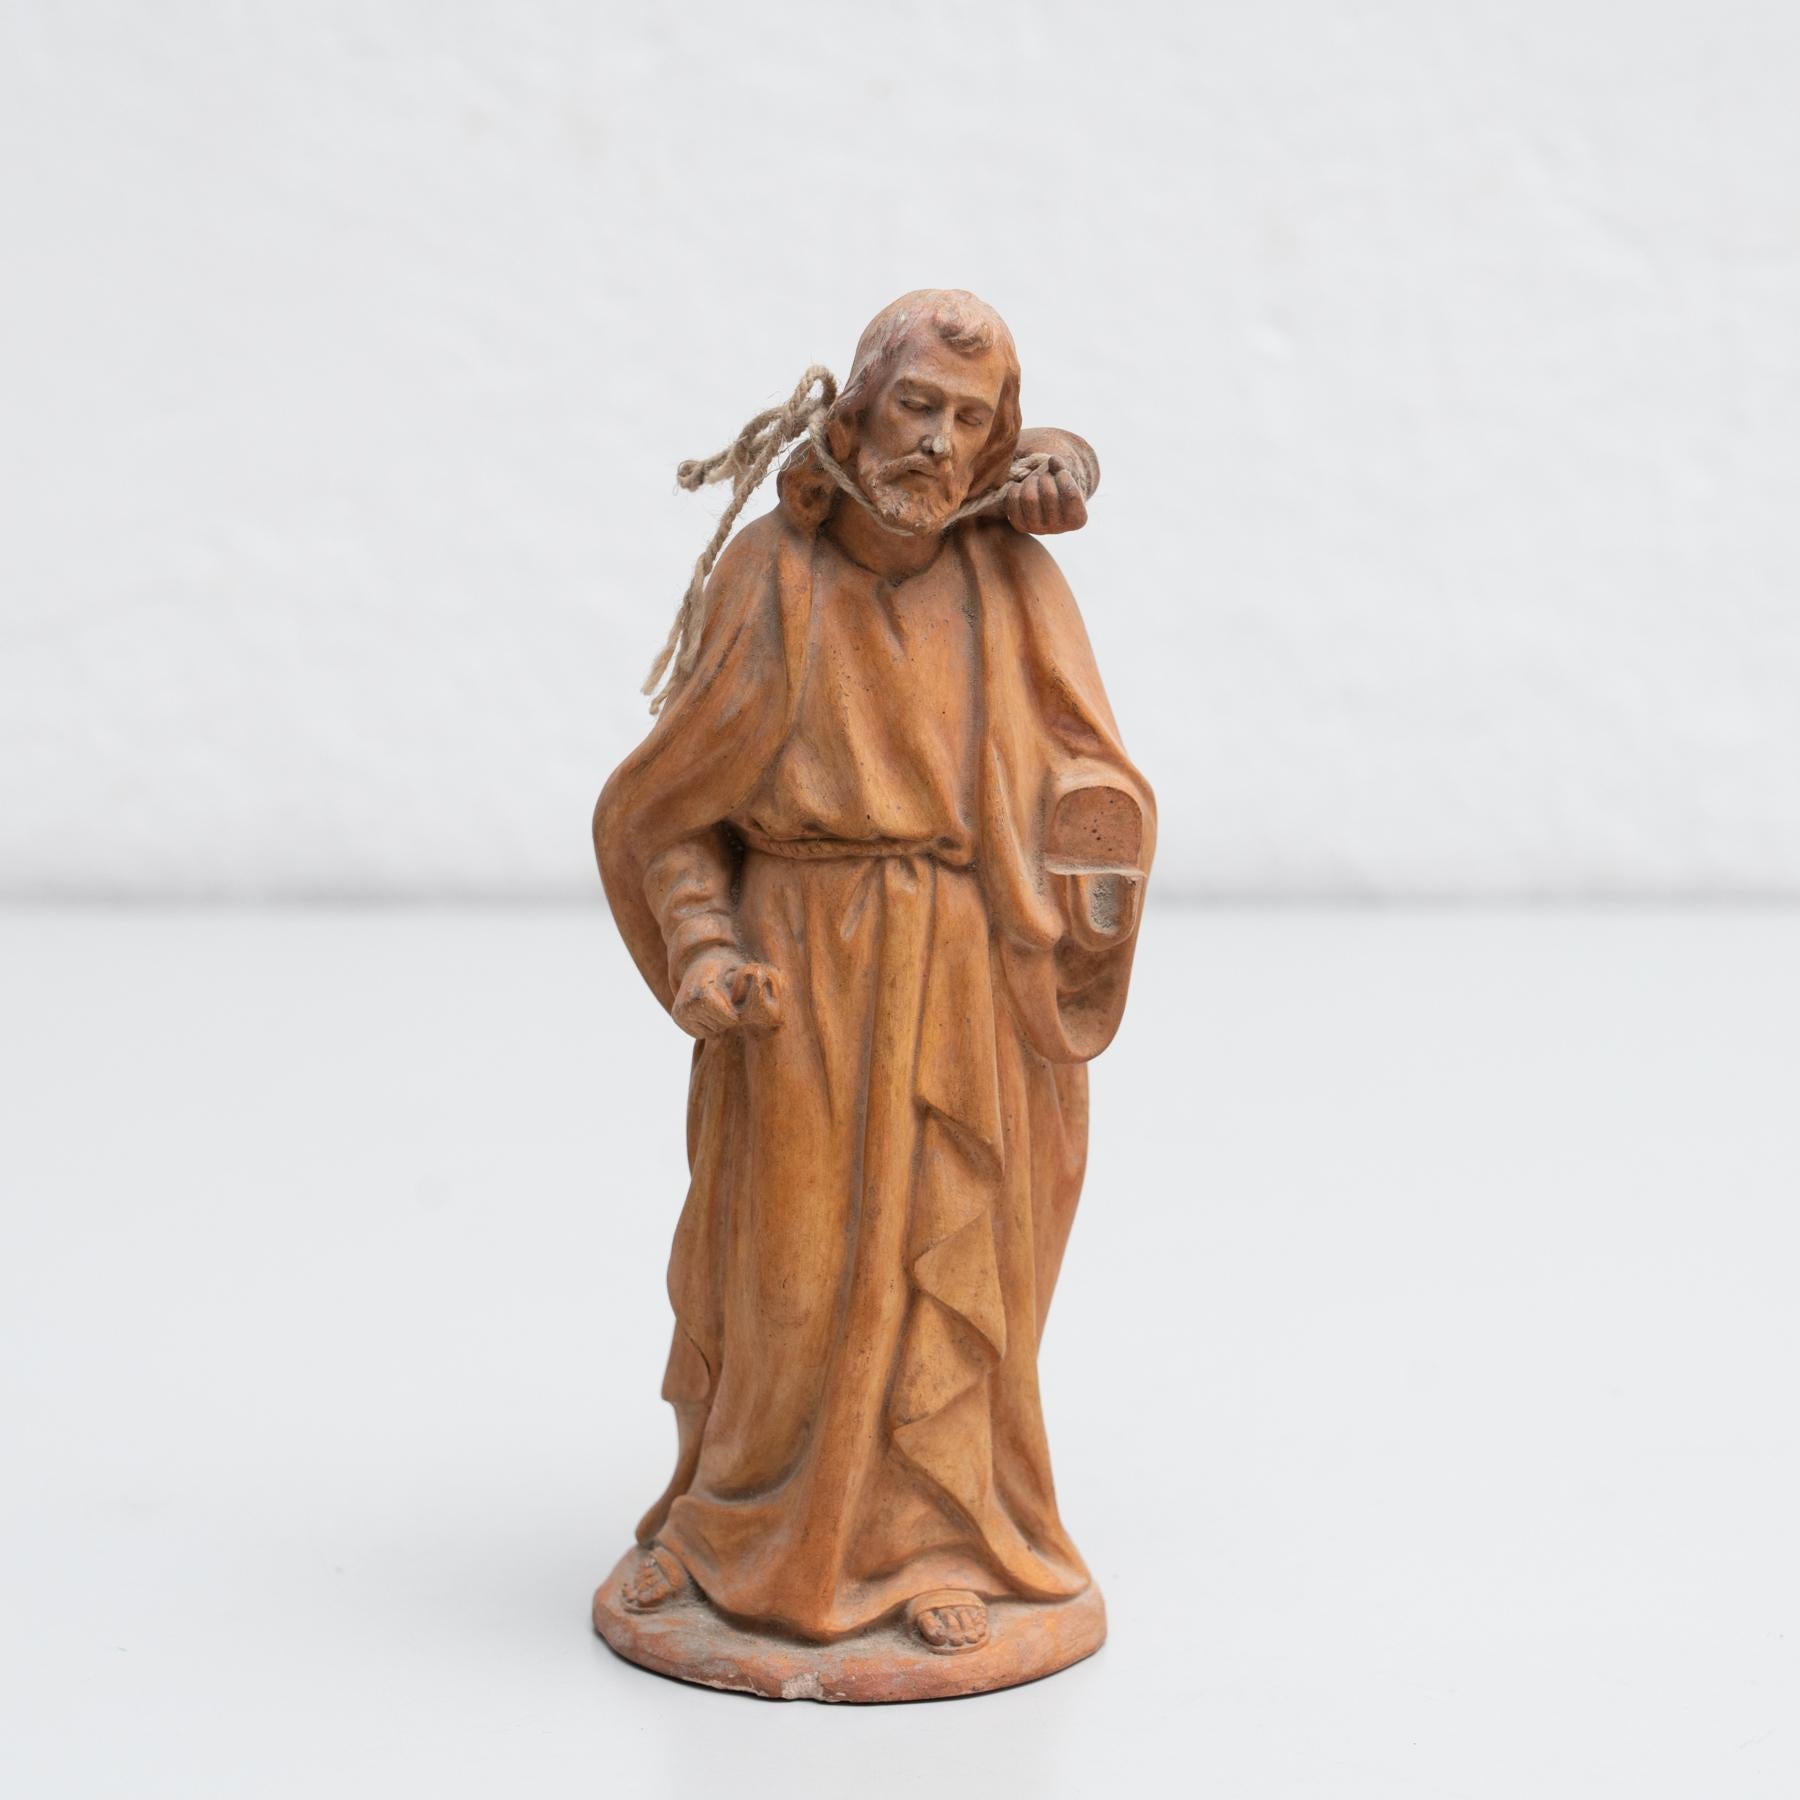 Traditional religious plaster figure of a saint.

Made in traditional Catalan atelier in Olot, Spain, circa 1950.

In original condition, with minor wear consistent with age and use, preserving a beautiful patina.

Olot has a long tradition in the